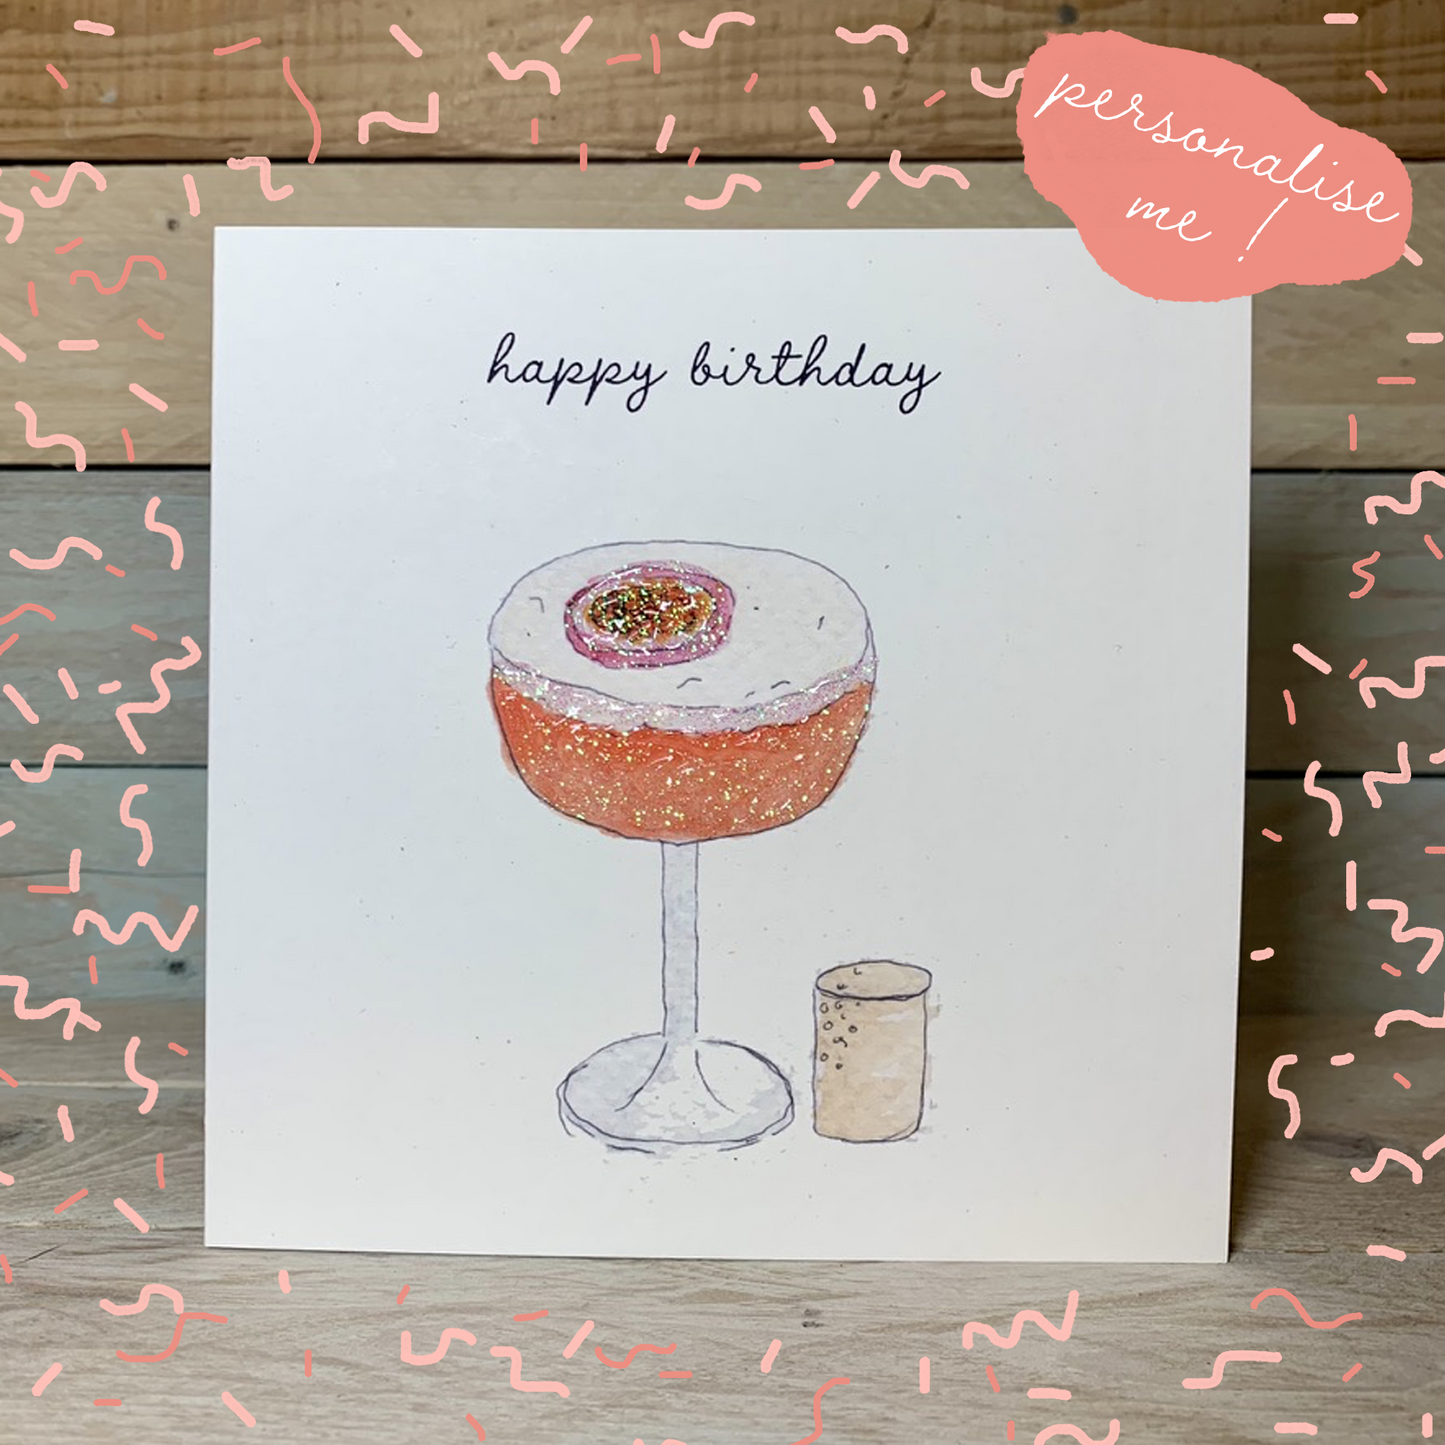 Passionfruit Martini Birthday Card - Arty Bee Designs 